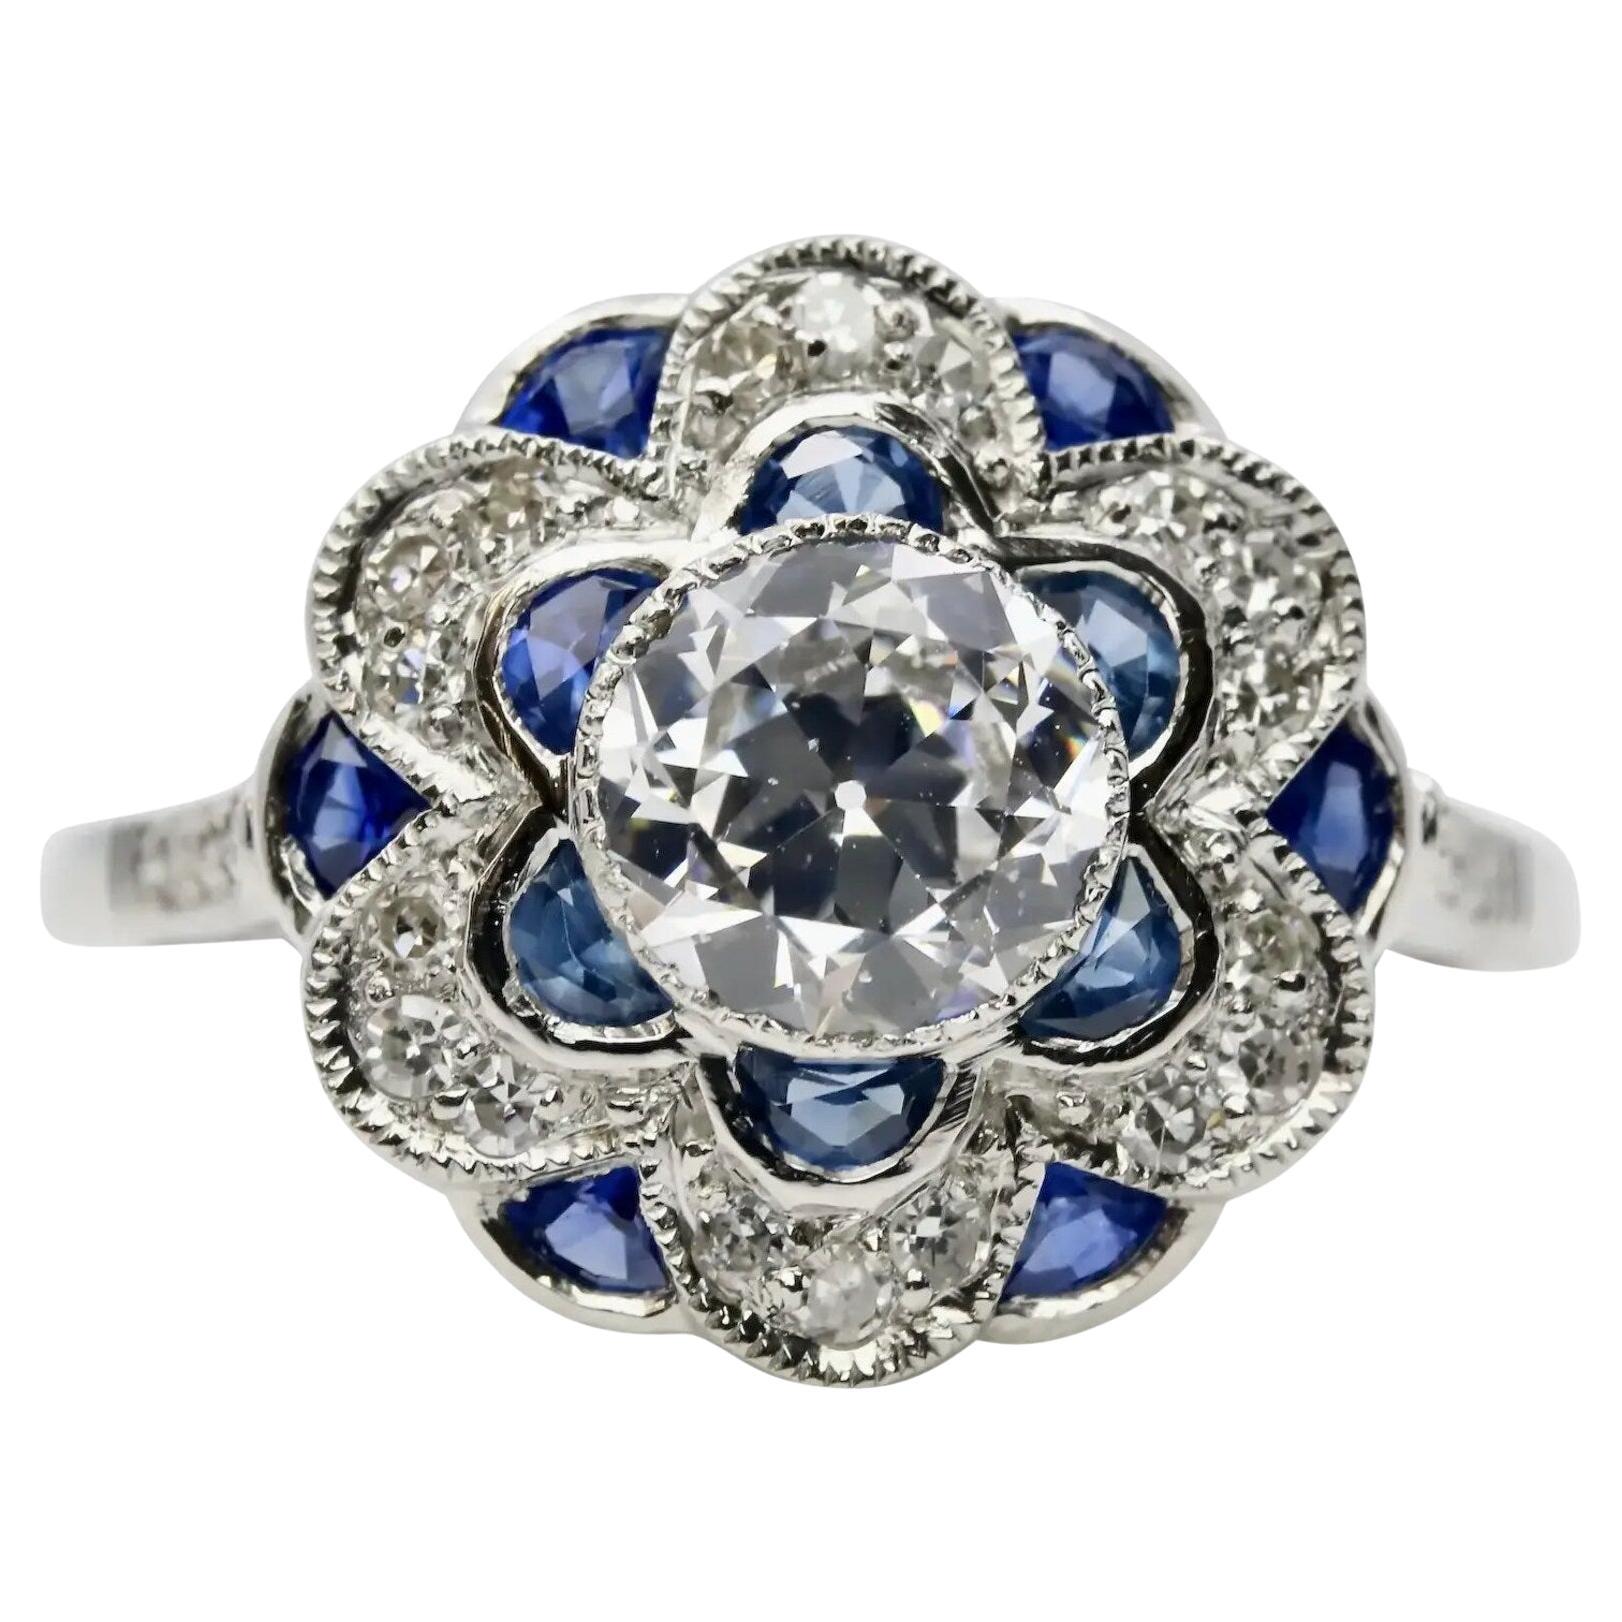 Blossoming Floral Diamond & Sapphire Ring in Platinum